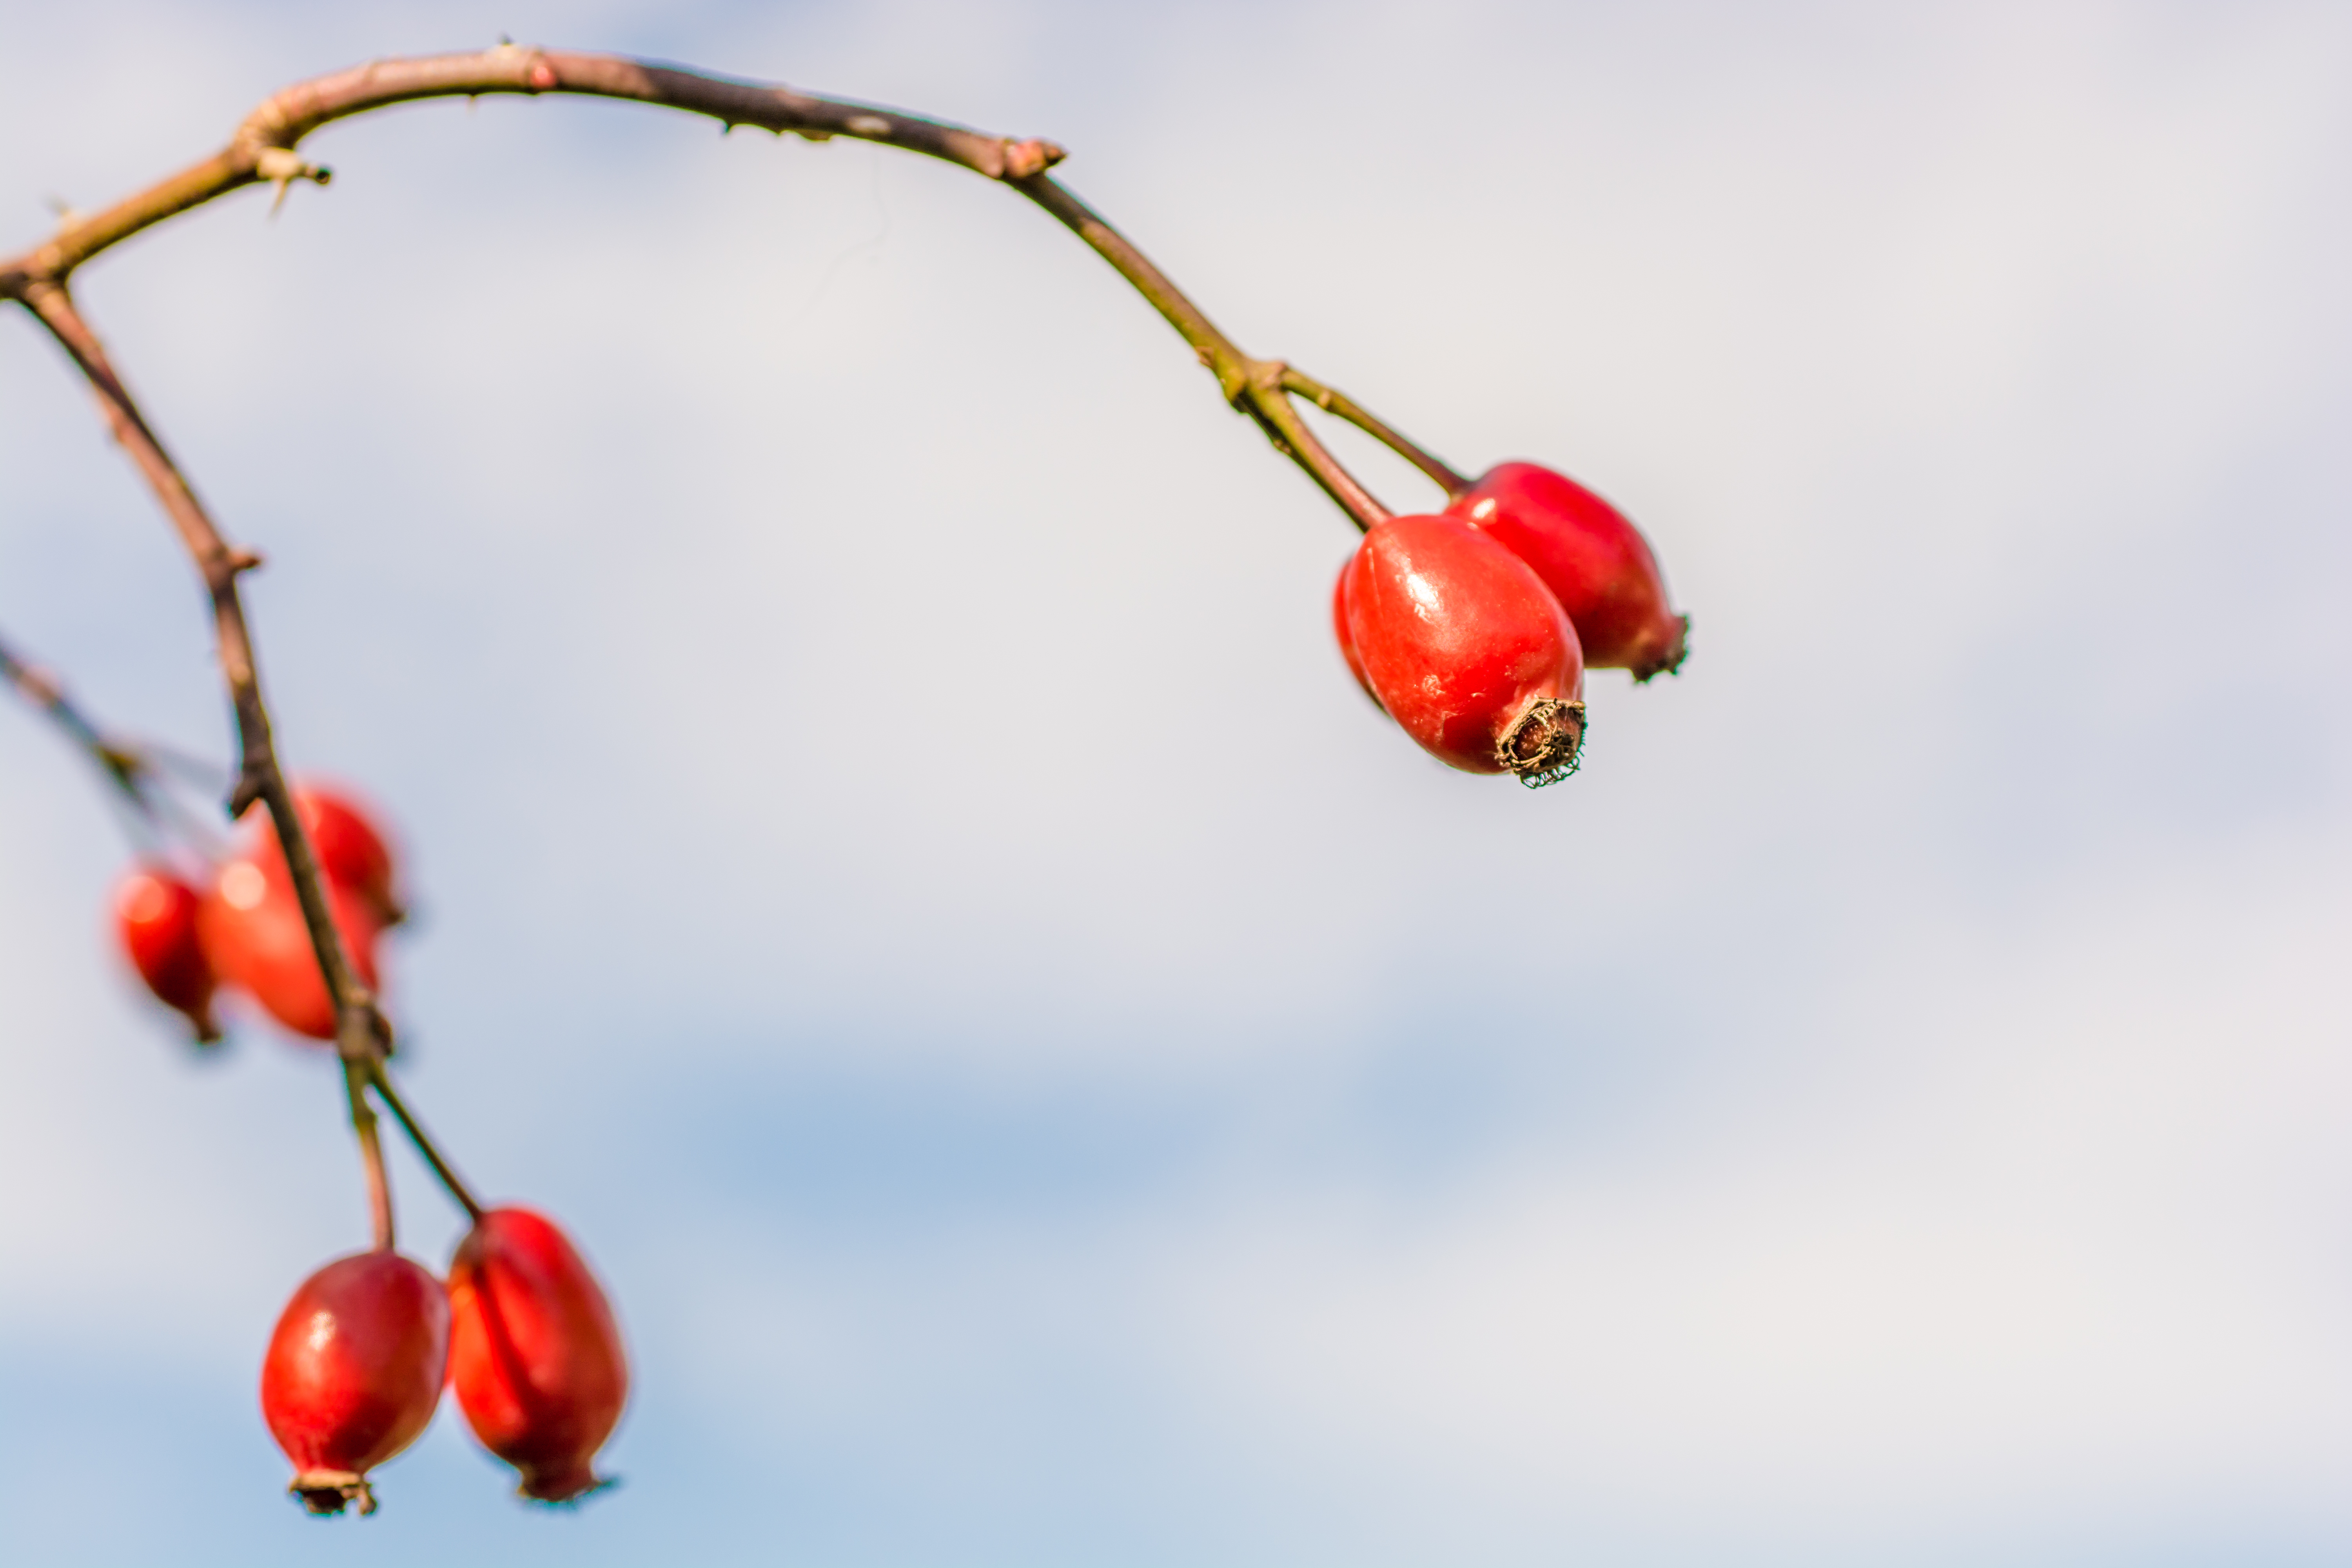 Dog rose fruit with blue sky in background